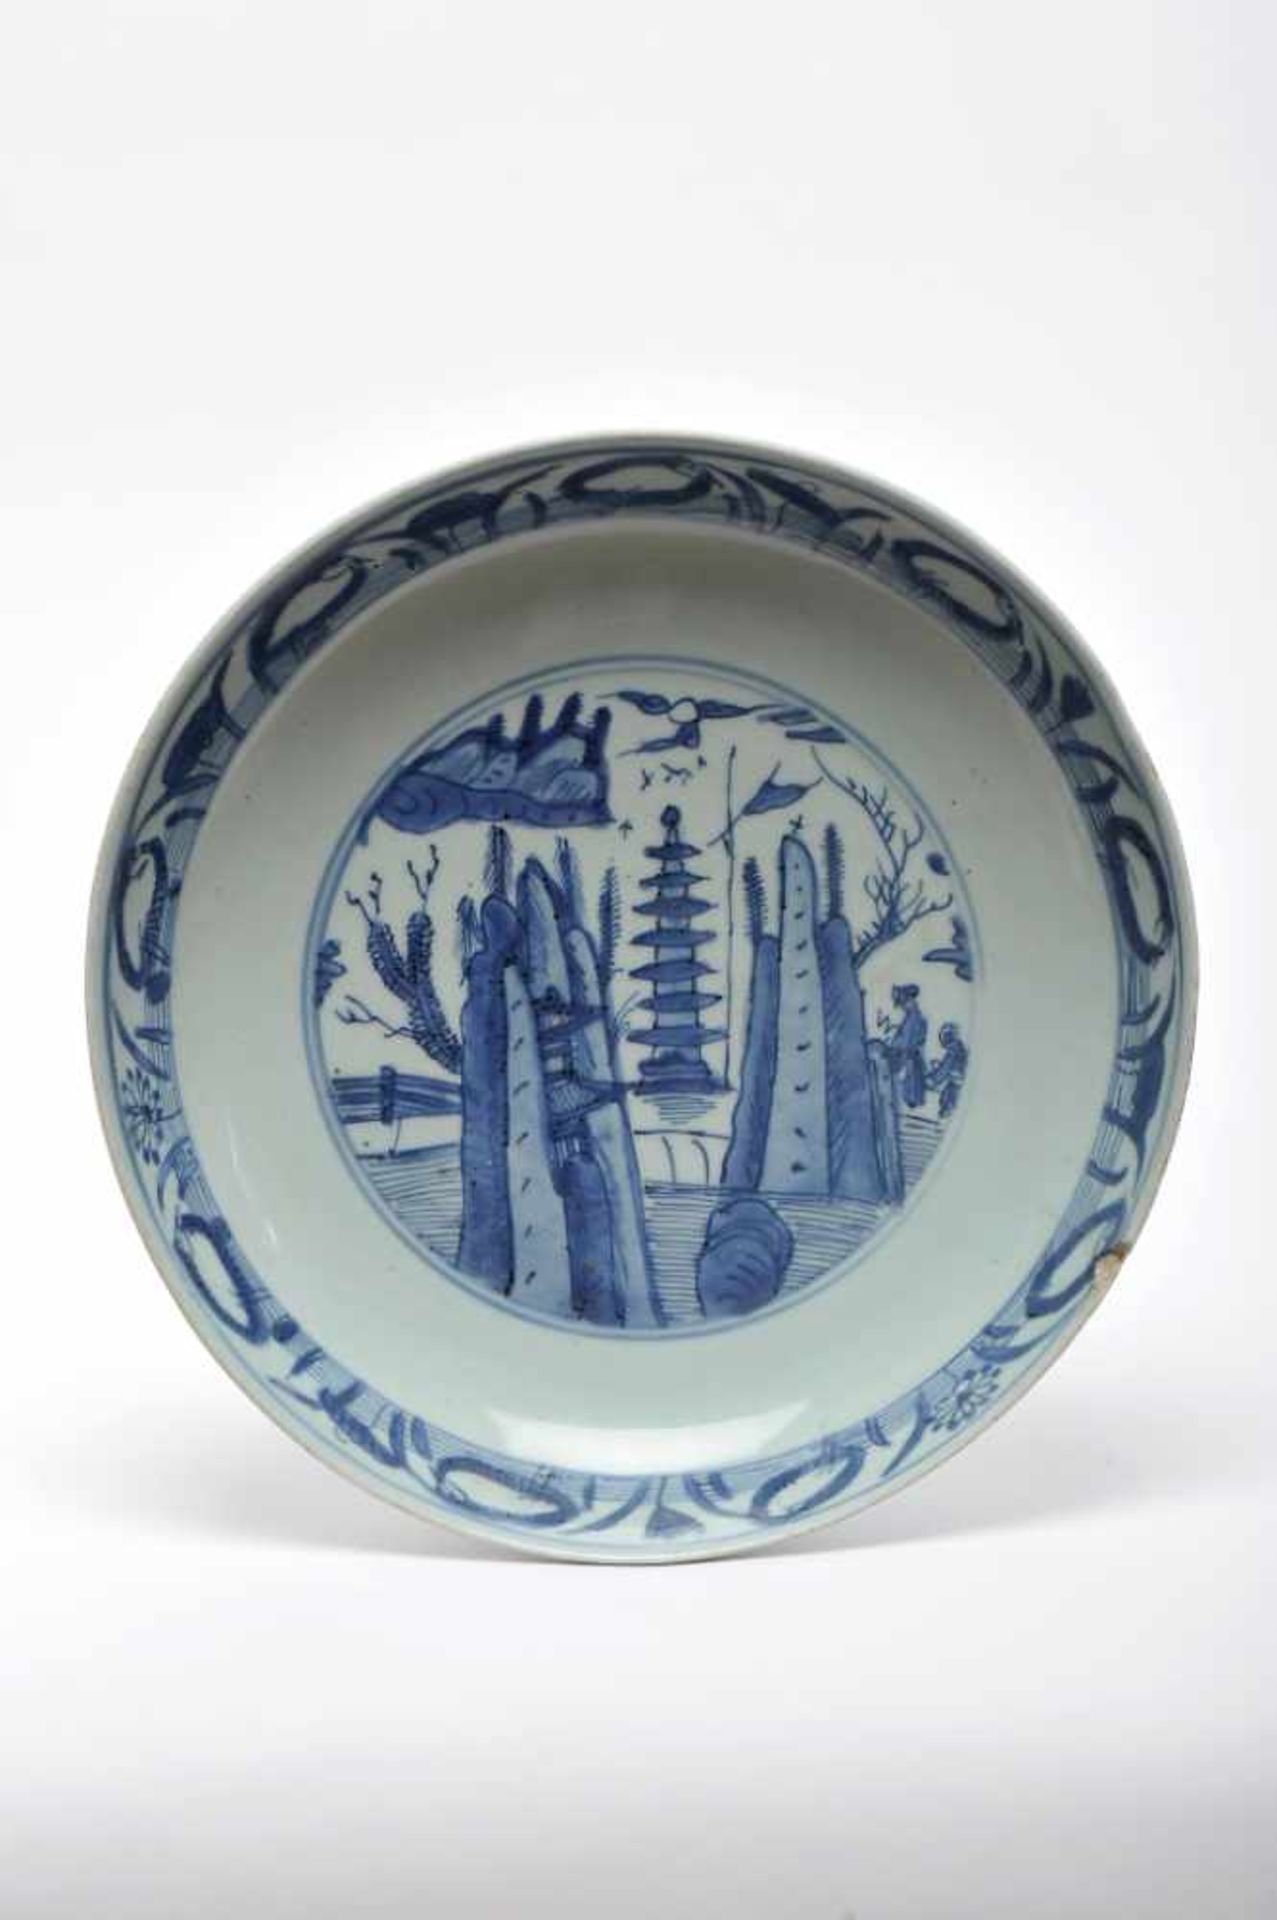 A Small DishA Small Dish, Chinese export porcelain, blue decoration "Landscape with rocks and